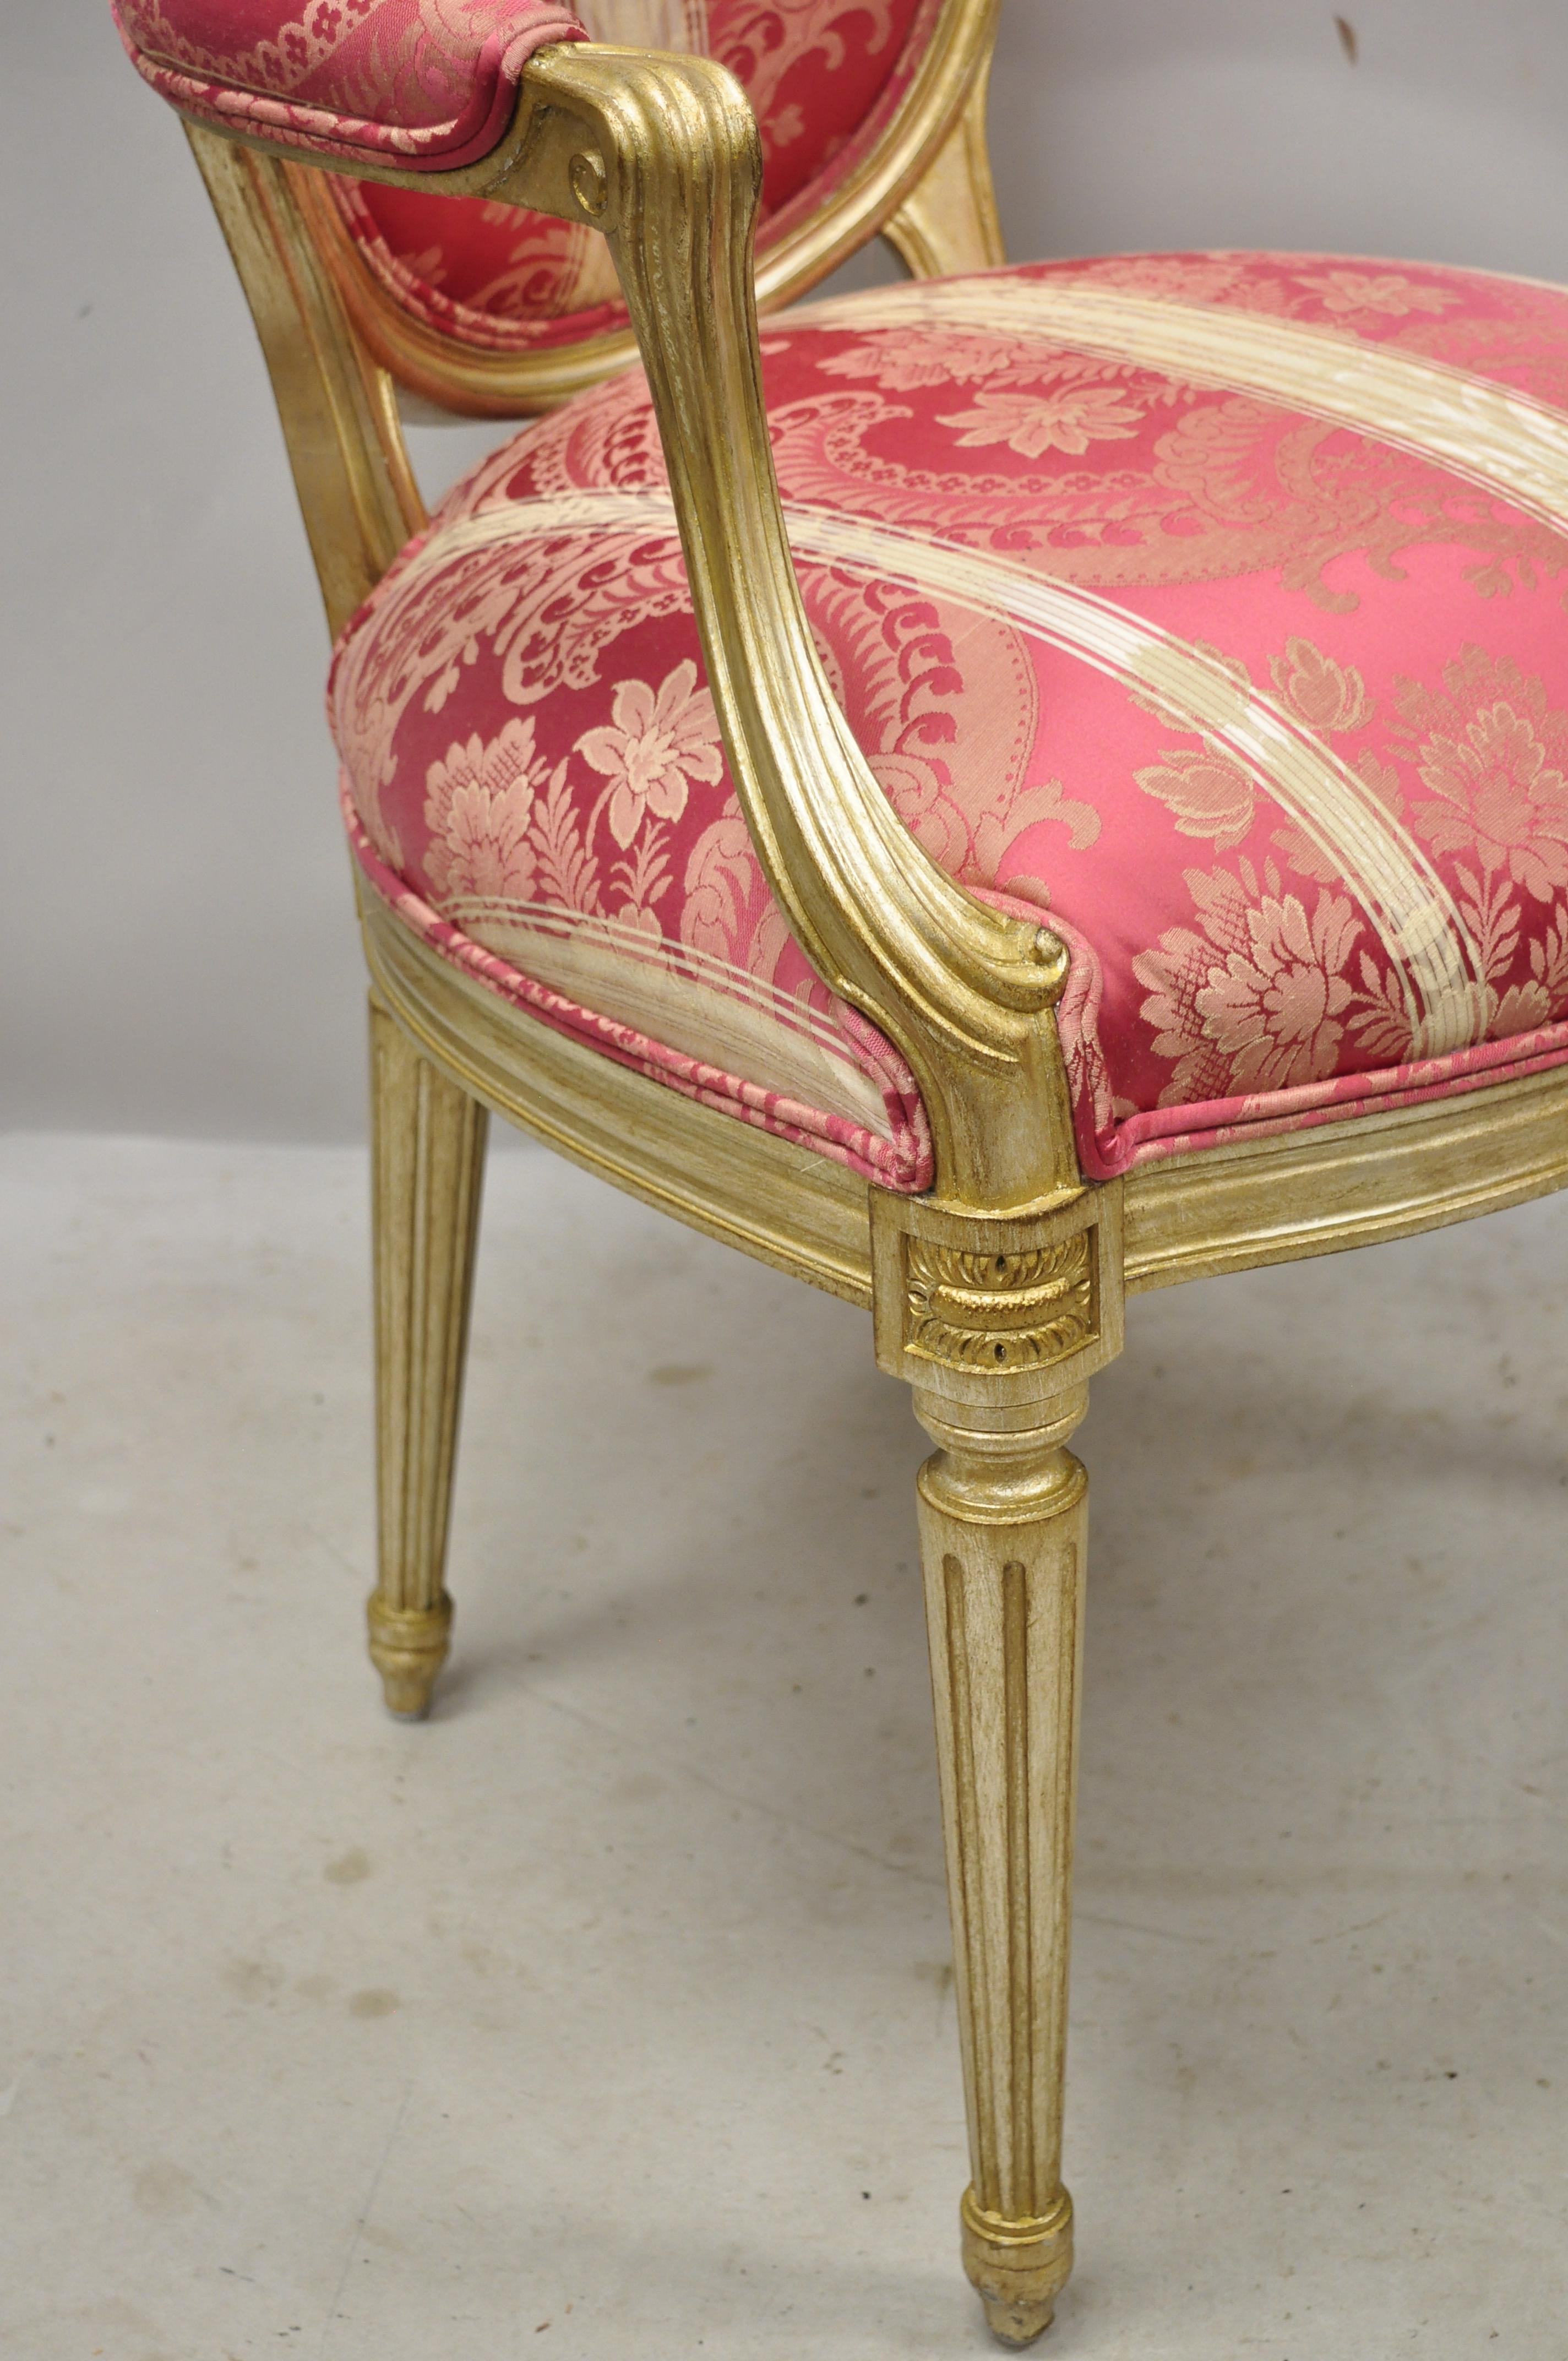 Contemporary French Louis XVI Style Silver Gold Gilt Pink Damask Oval Back Arm Chairs, Pair For Sale